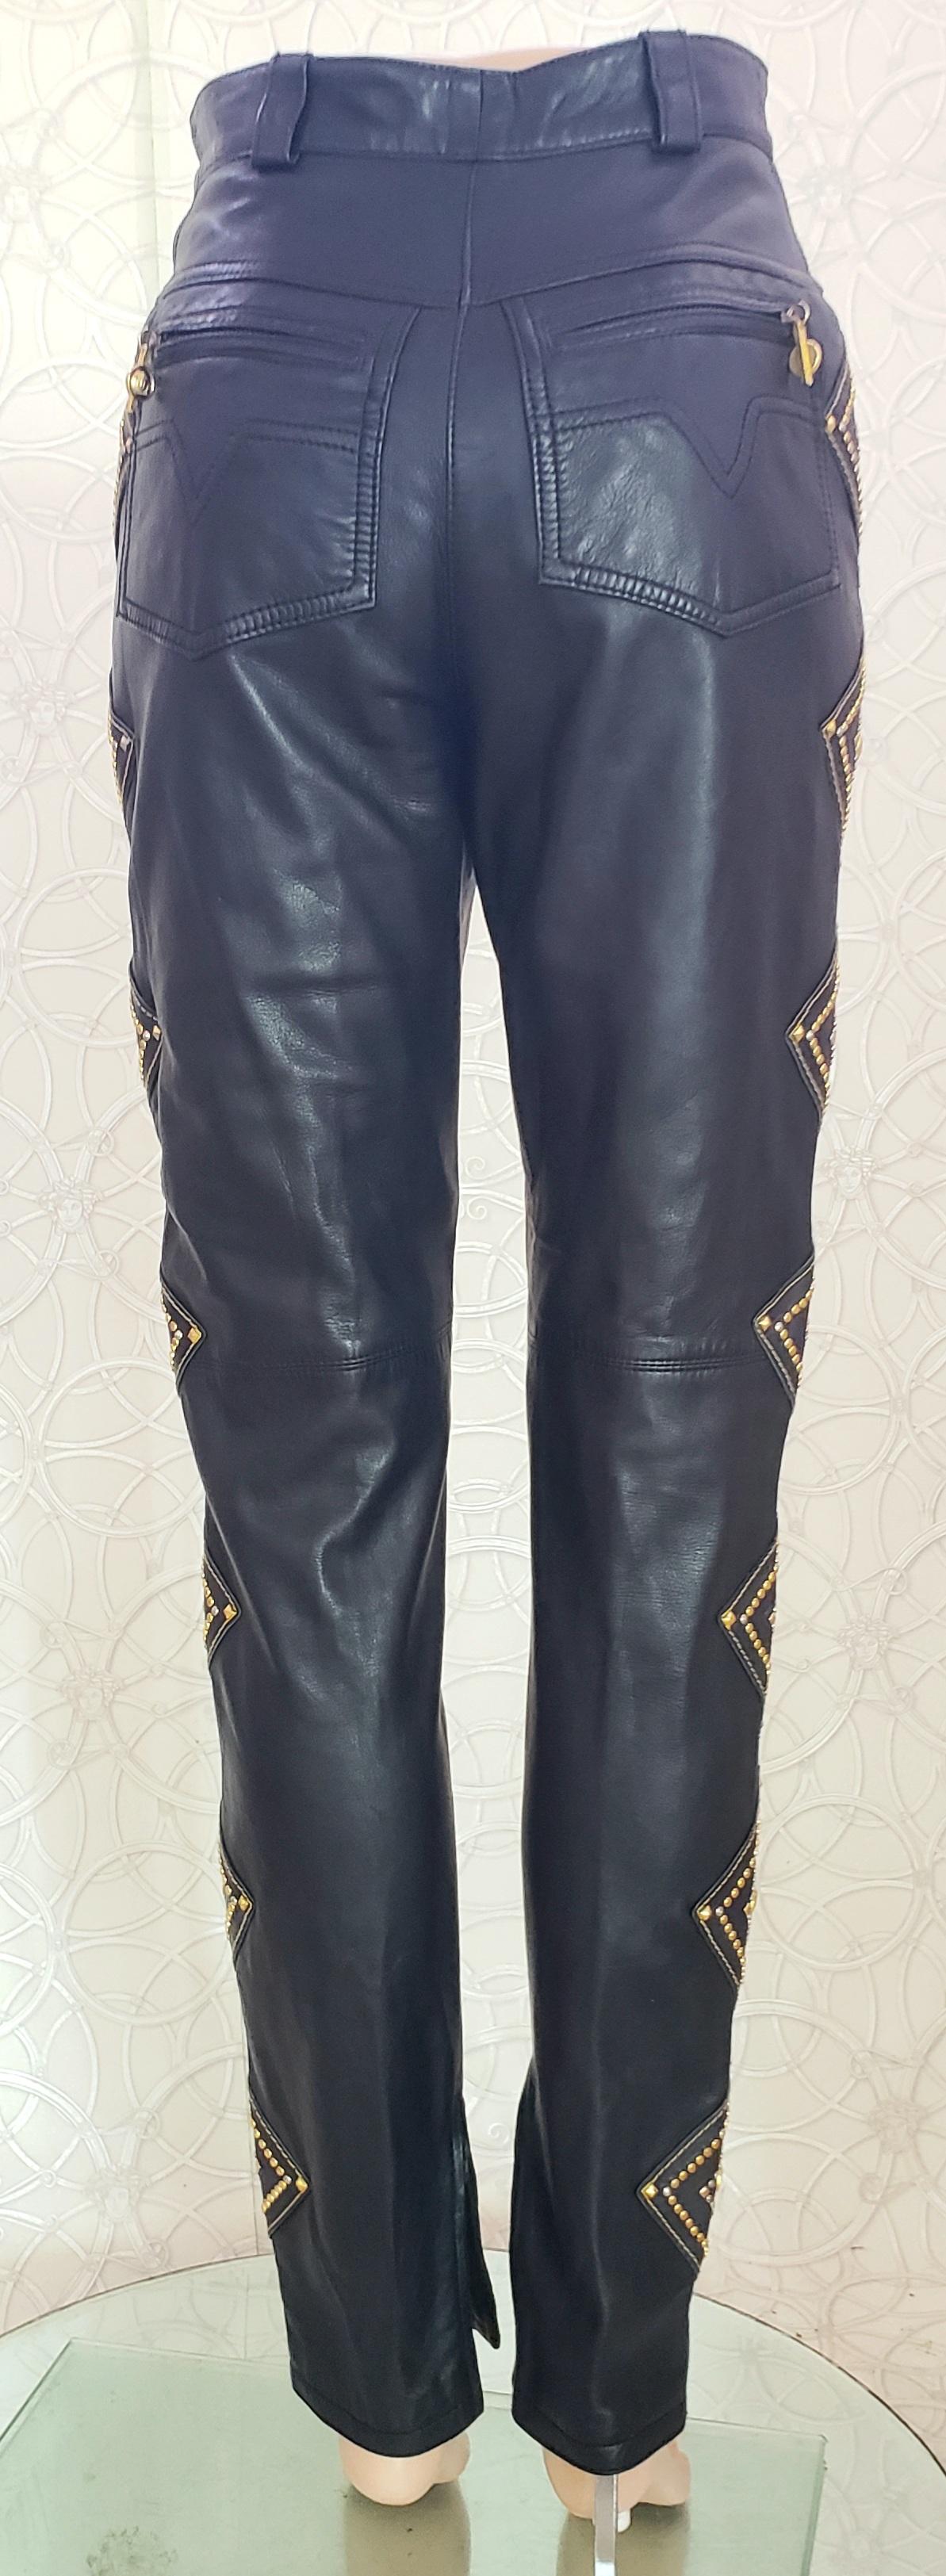 1991 GIANNI VERSACE PRIVATE MUSEUM WORTHY COLLECTION BLACK LEATHER STUDDED Pants For Sale 2